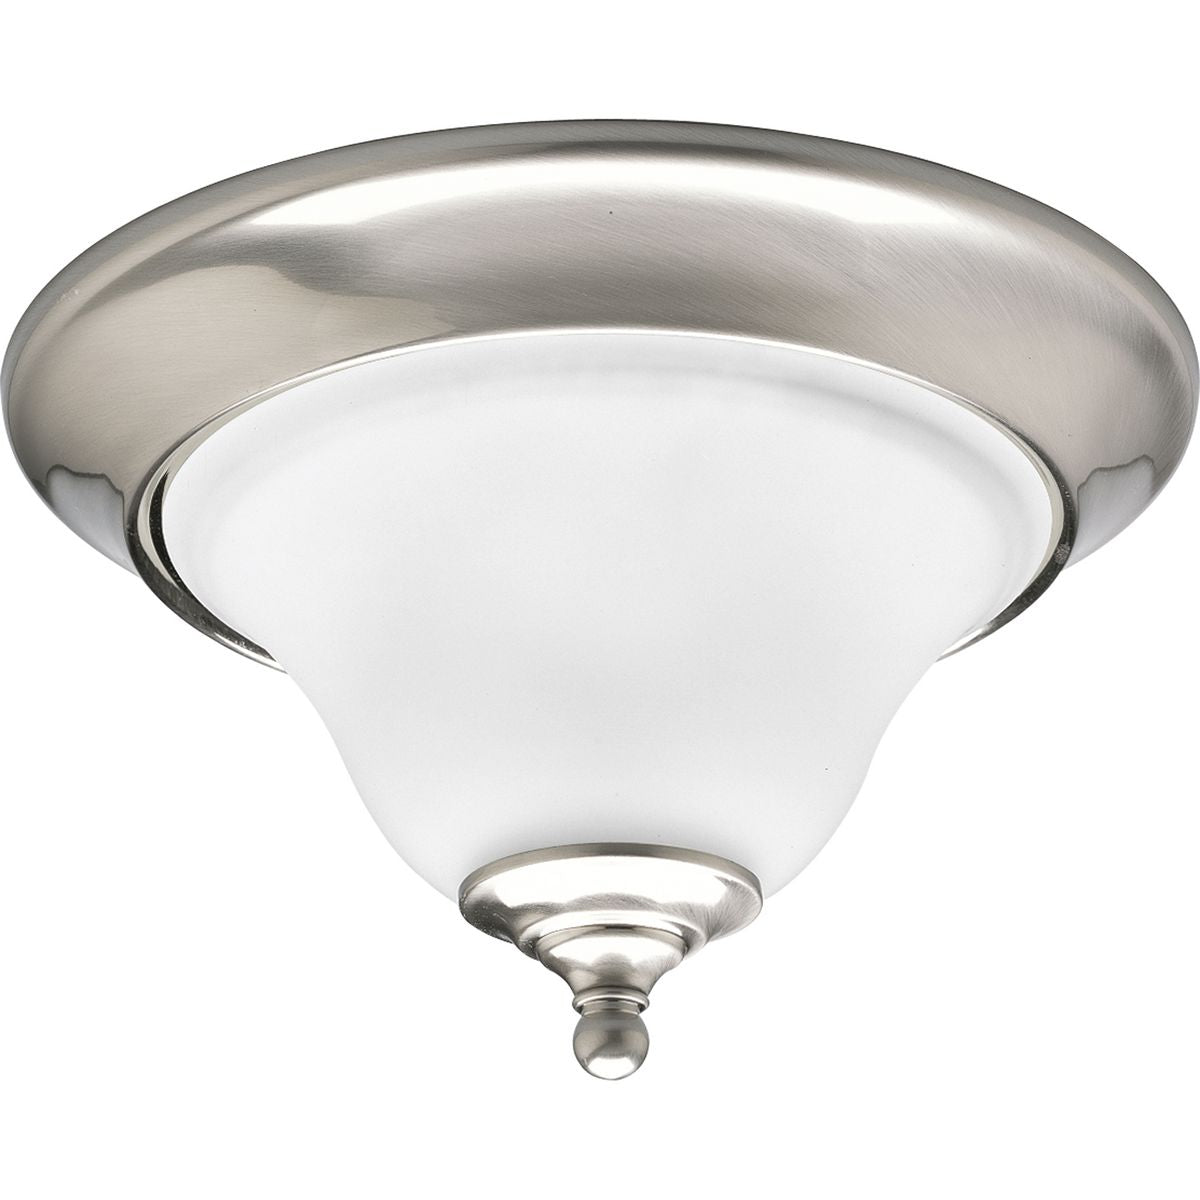 PROGRESS LIGHTING P3475-09 Brushed Nickel Trinity Collection One-Light 12-1/2" Close-to-Ceiling